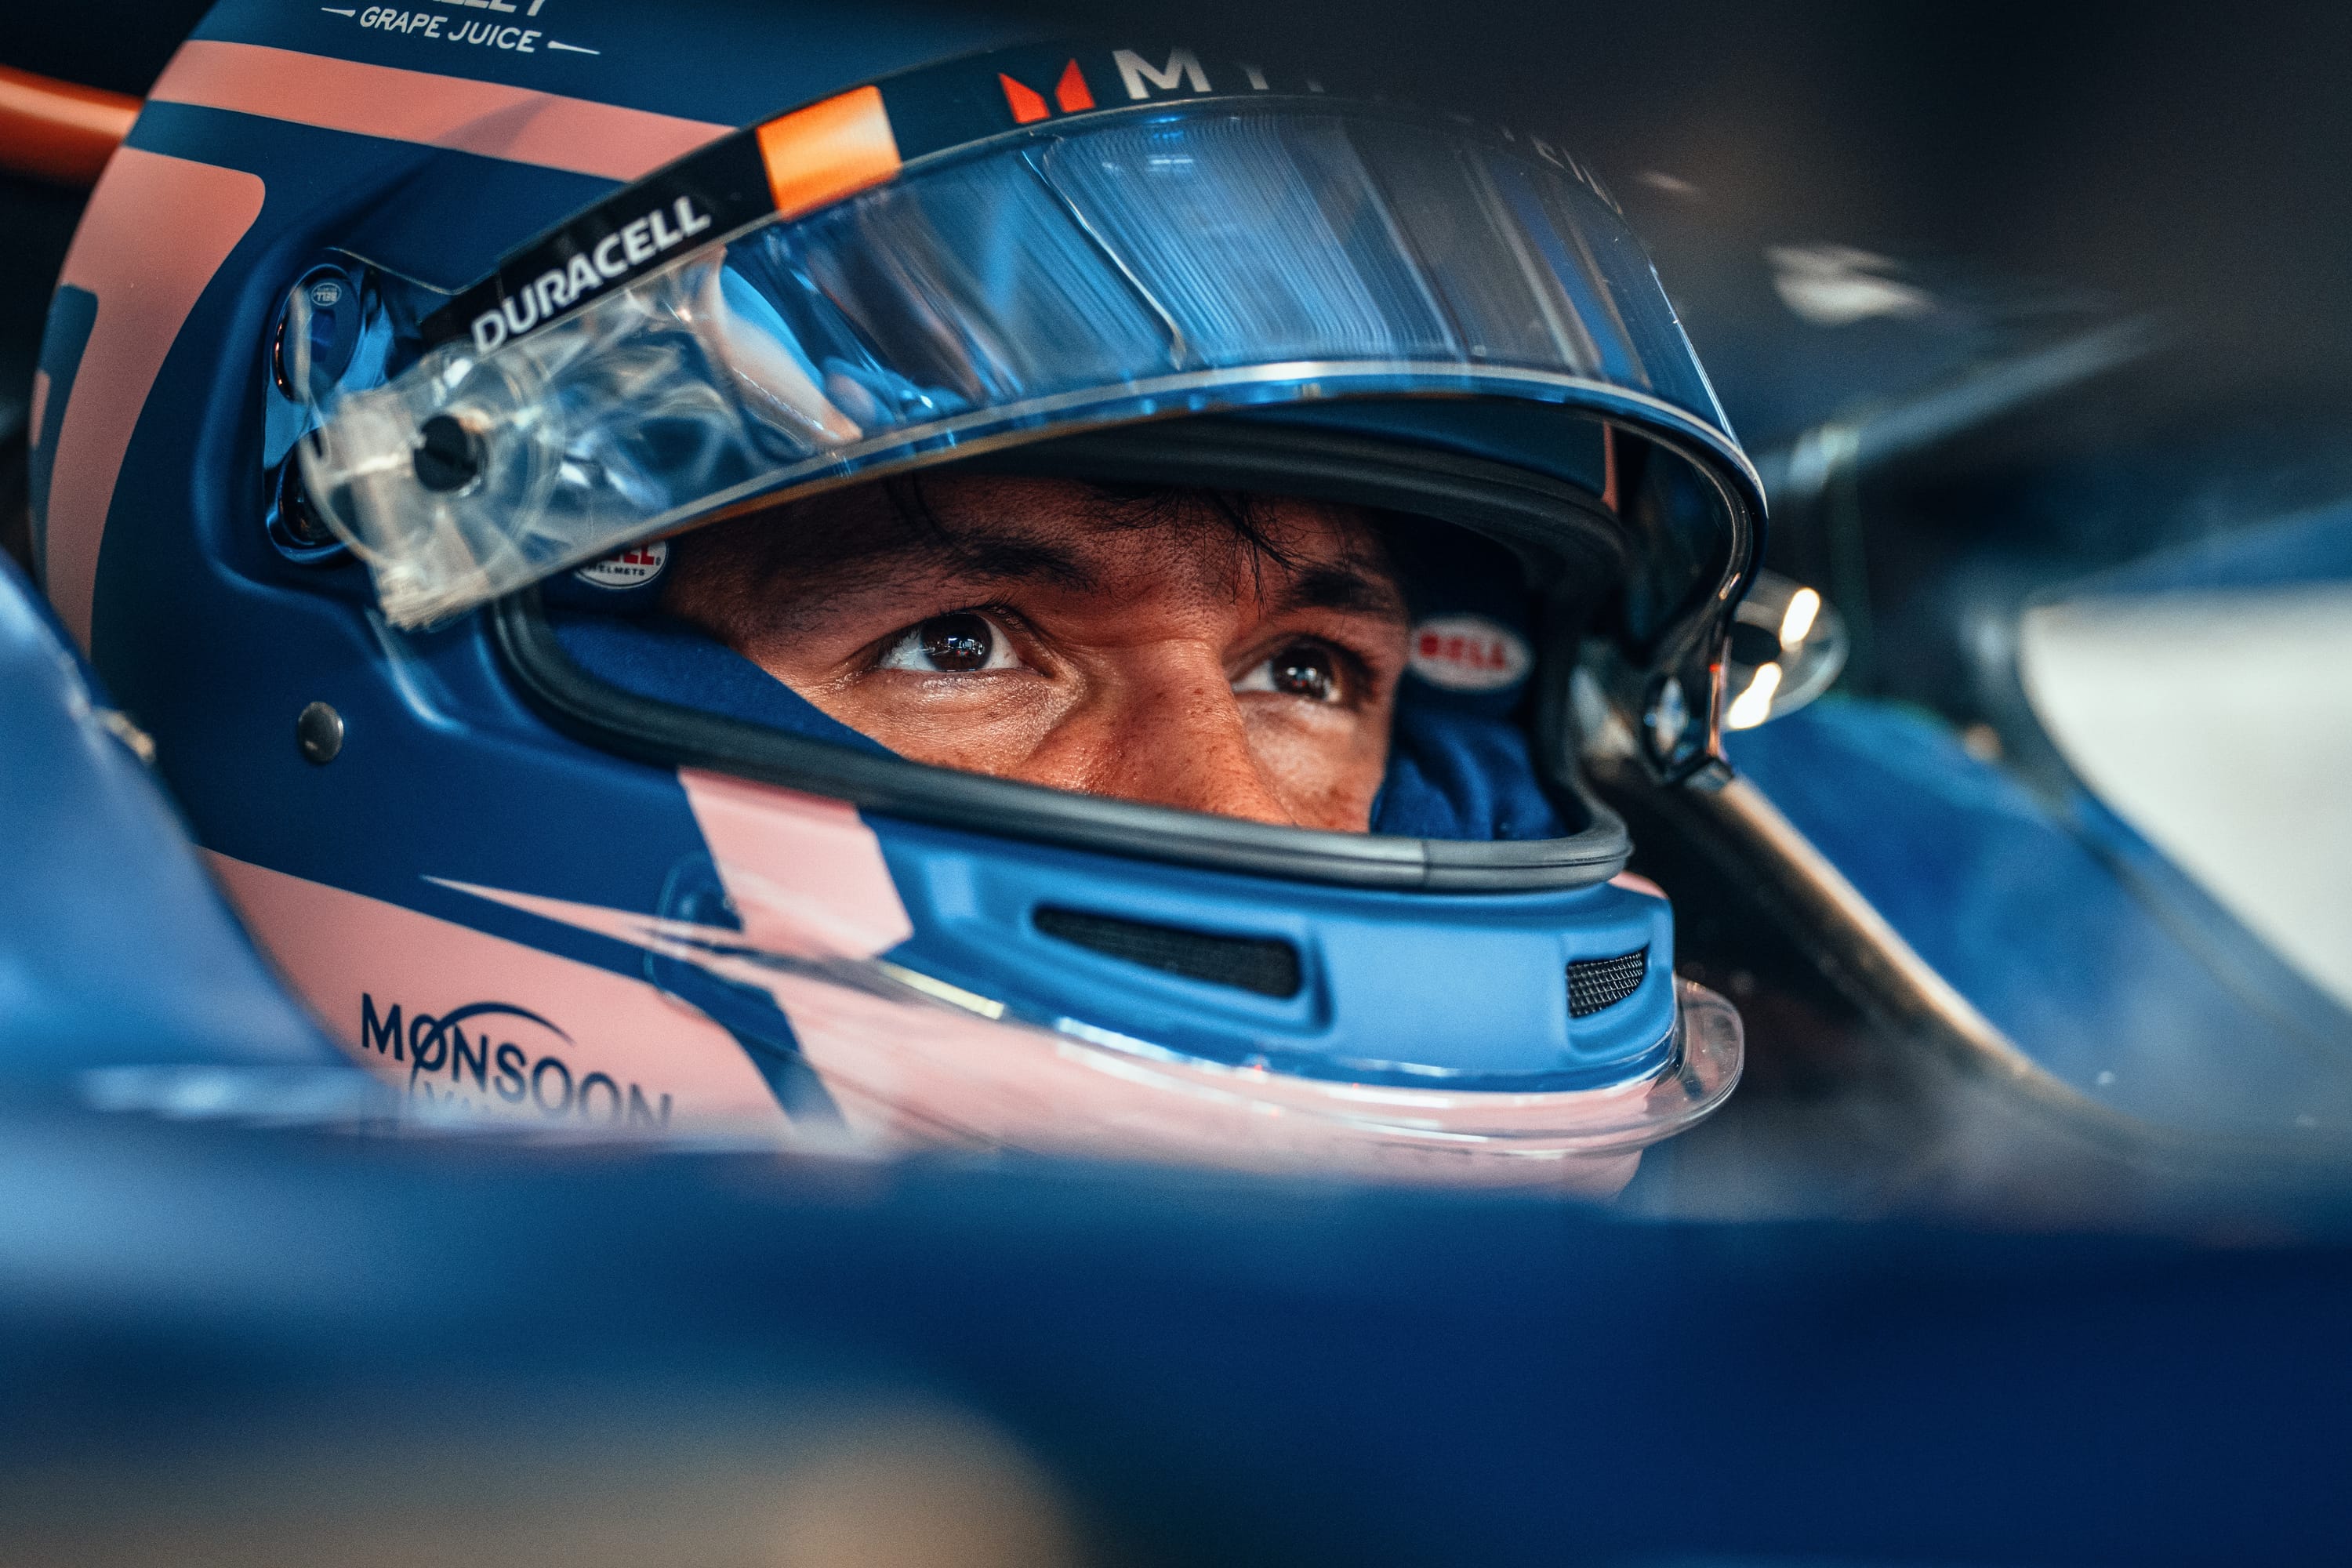 Albon signs contract extension with Williams